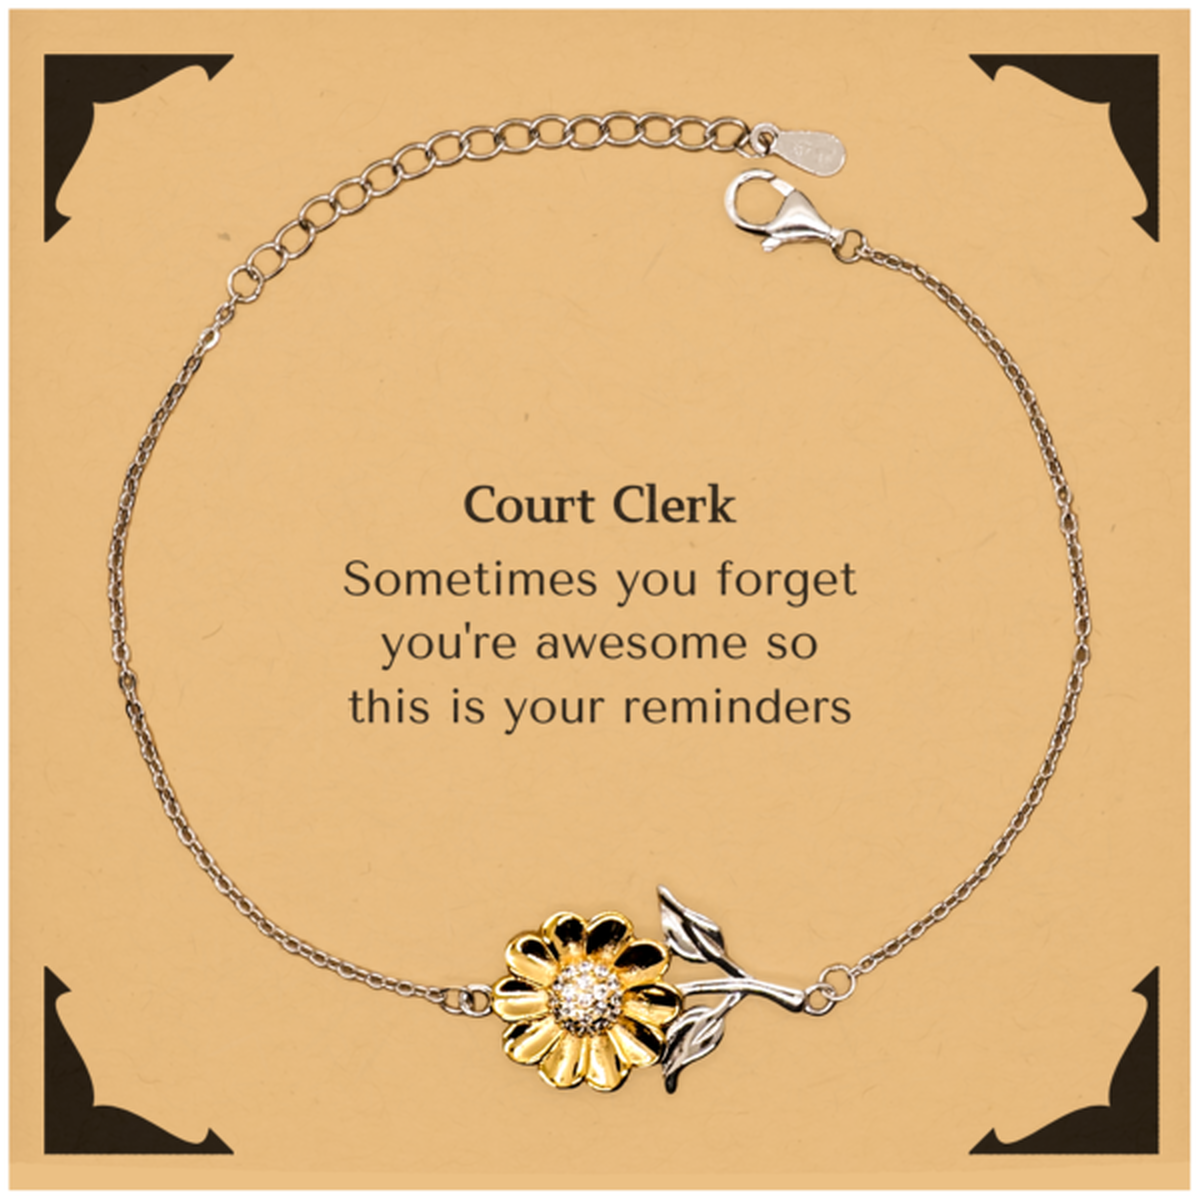 Sentimental Court Clerk Sunflower Bracelet, Court Clerk Sometimes you forget you're awesome so this is your reminders, Graduation Christmas Birthday Gifts for Court Clerk, Men, Women, Coworkers